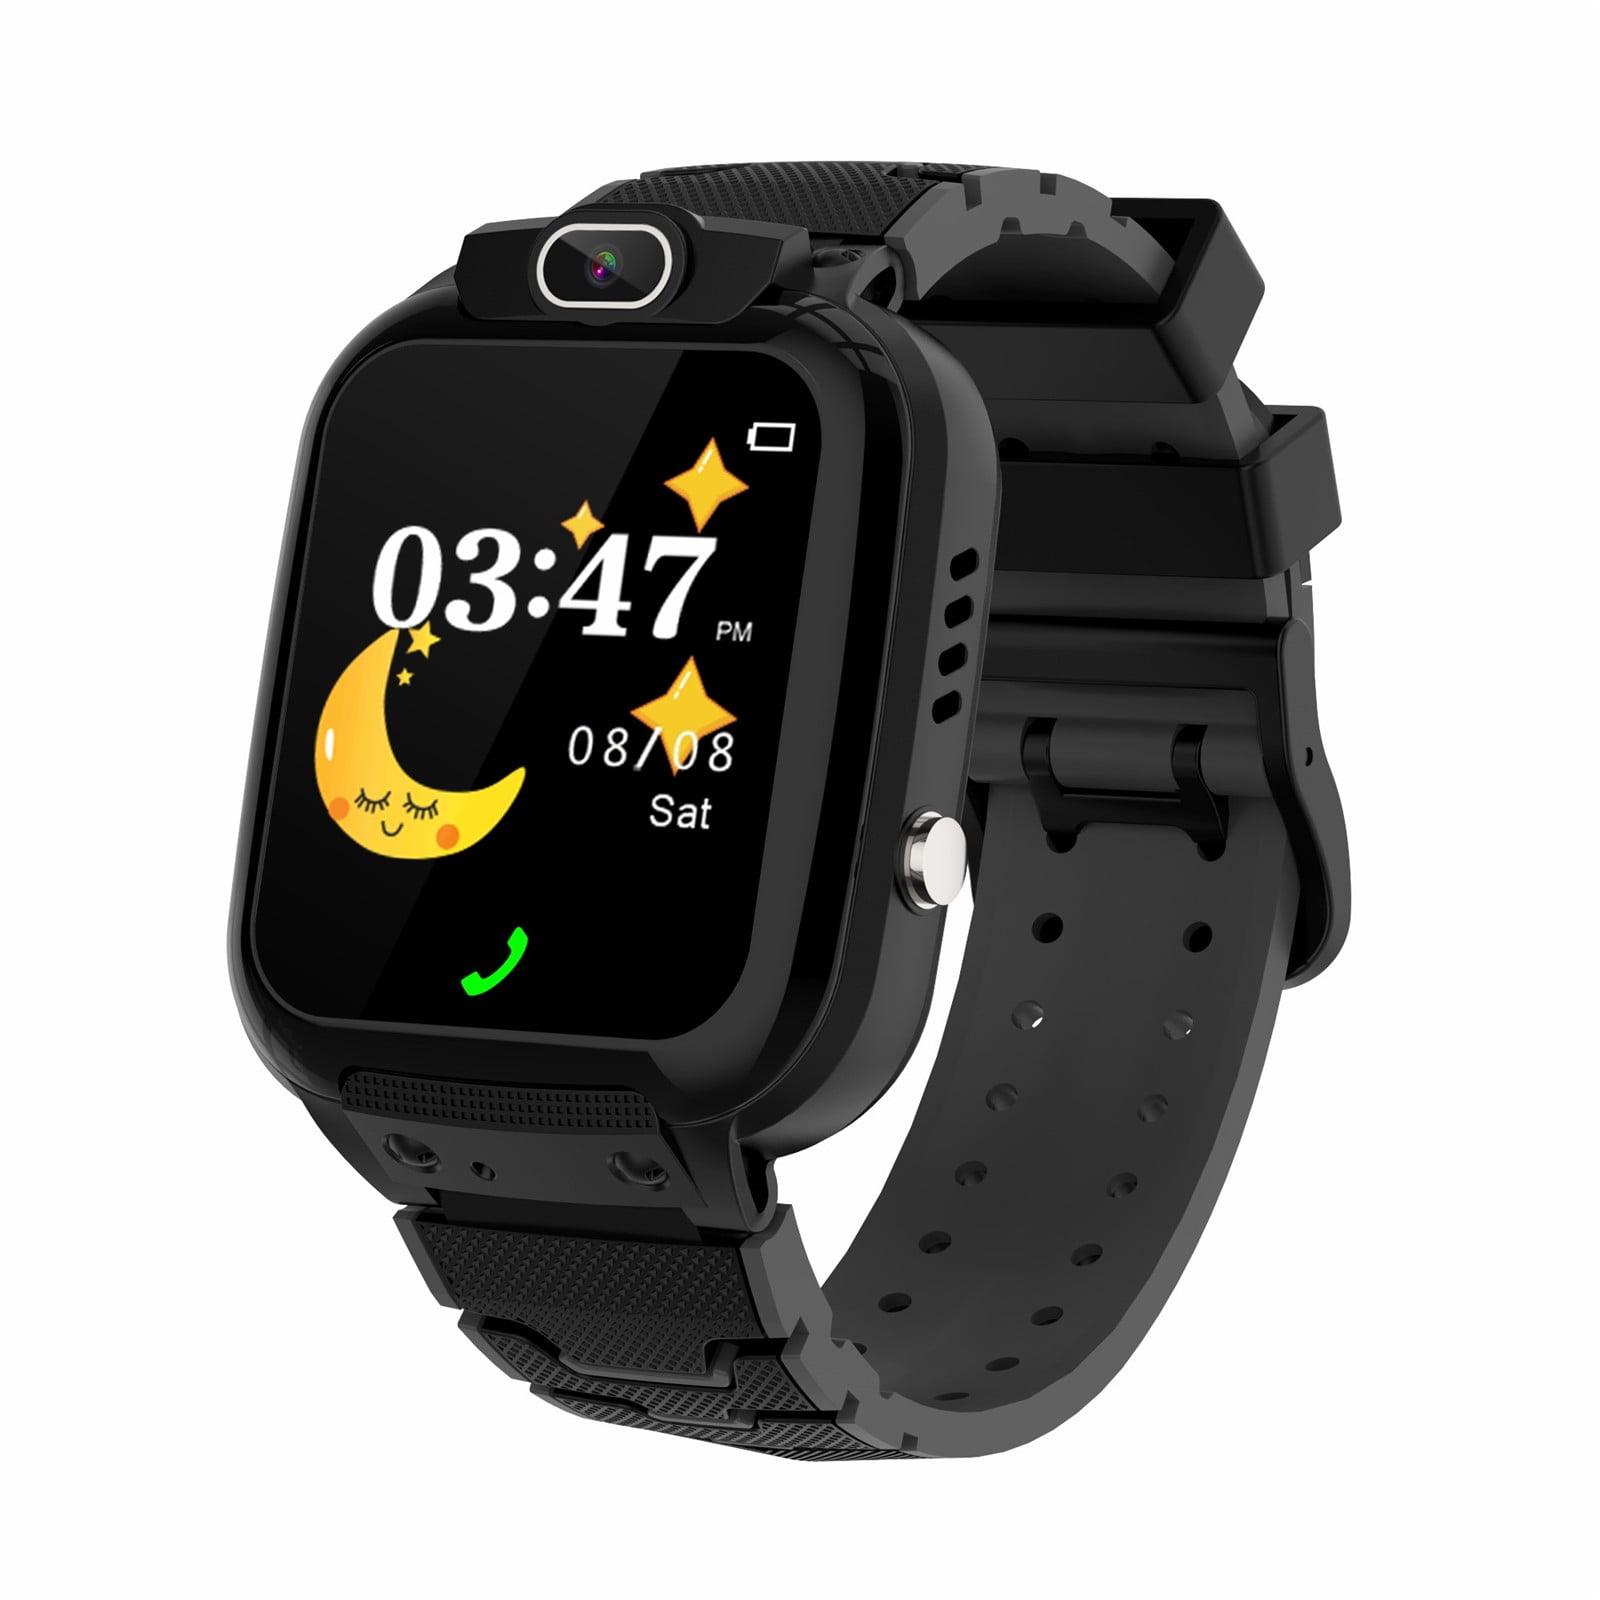 Details about   I Tech jr kids smartwatch play fun engaging games like 